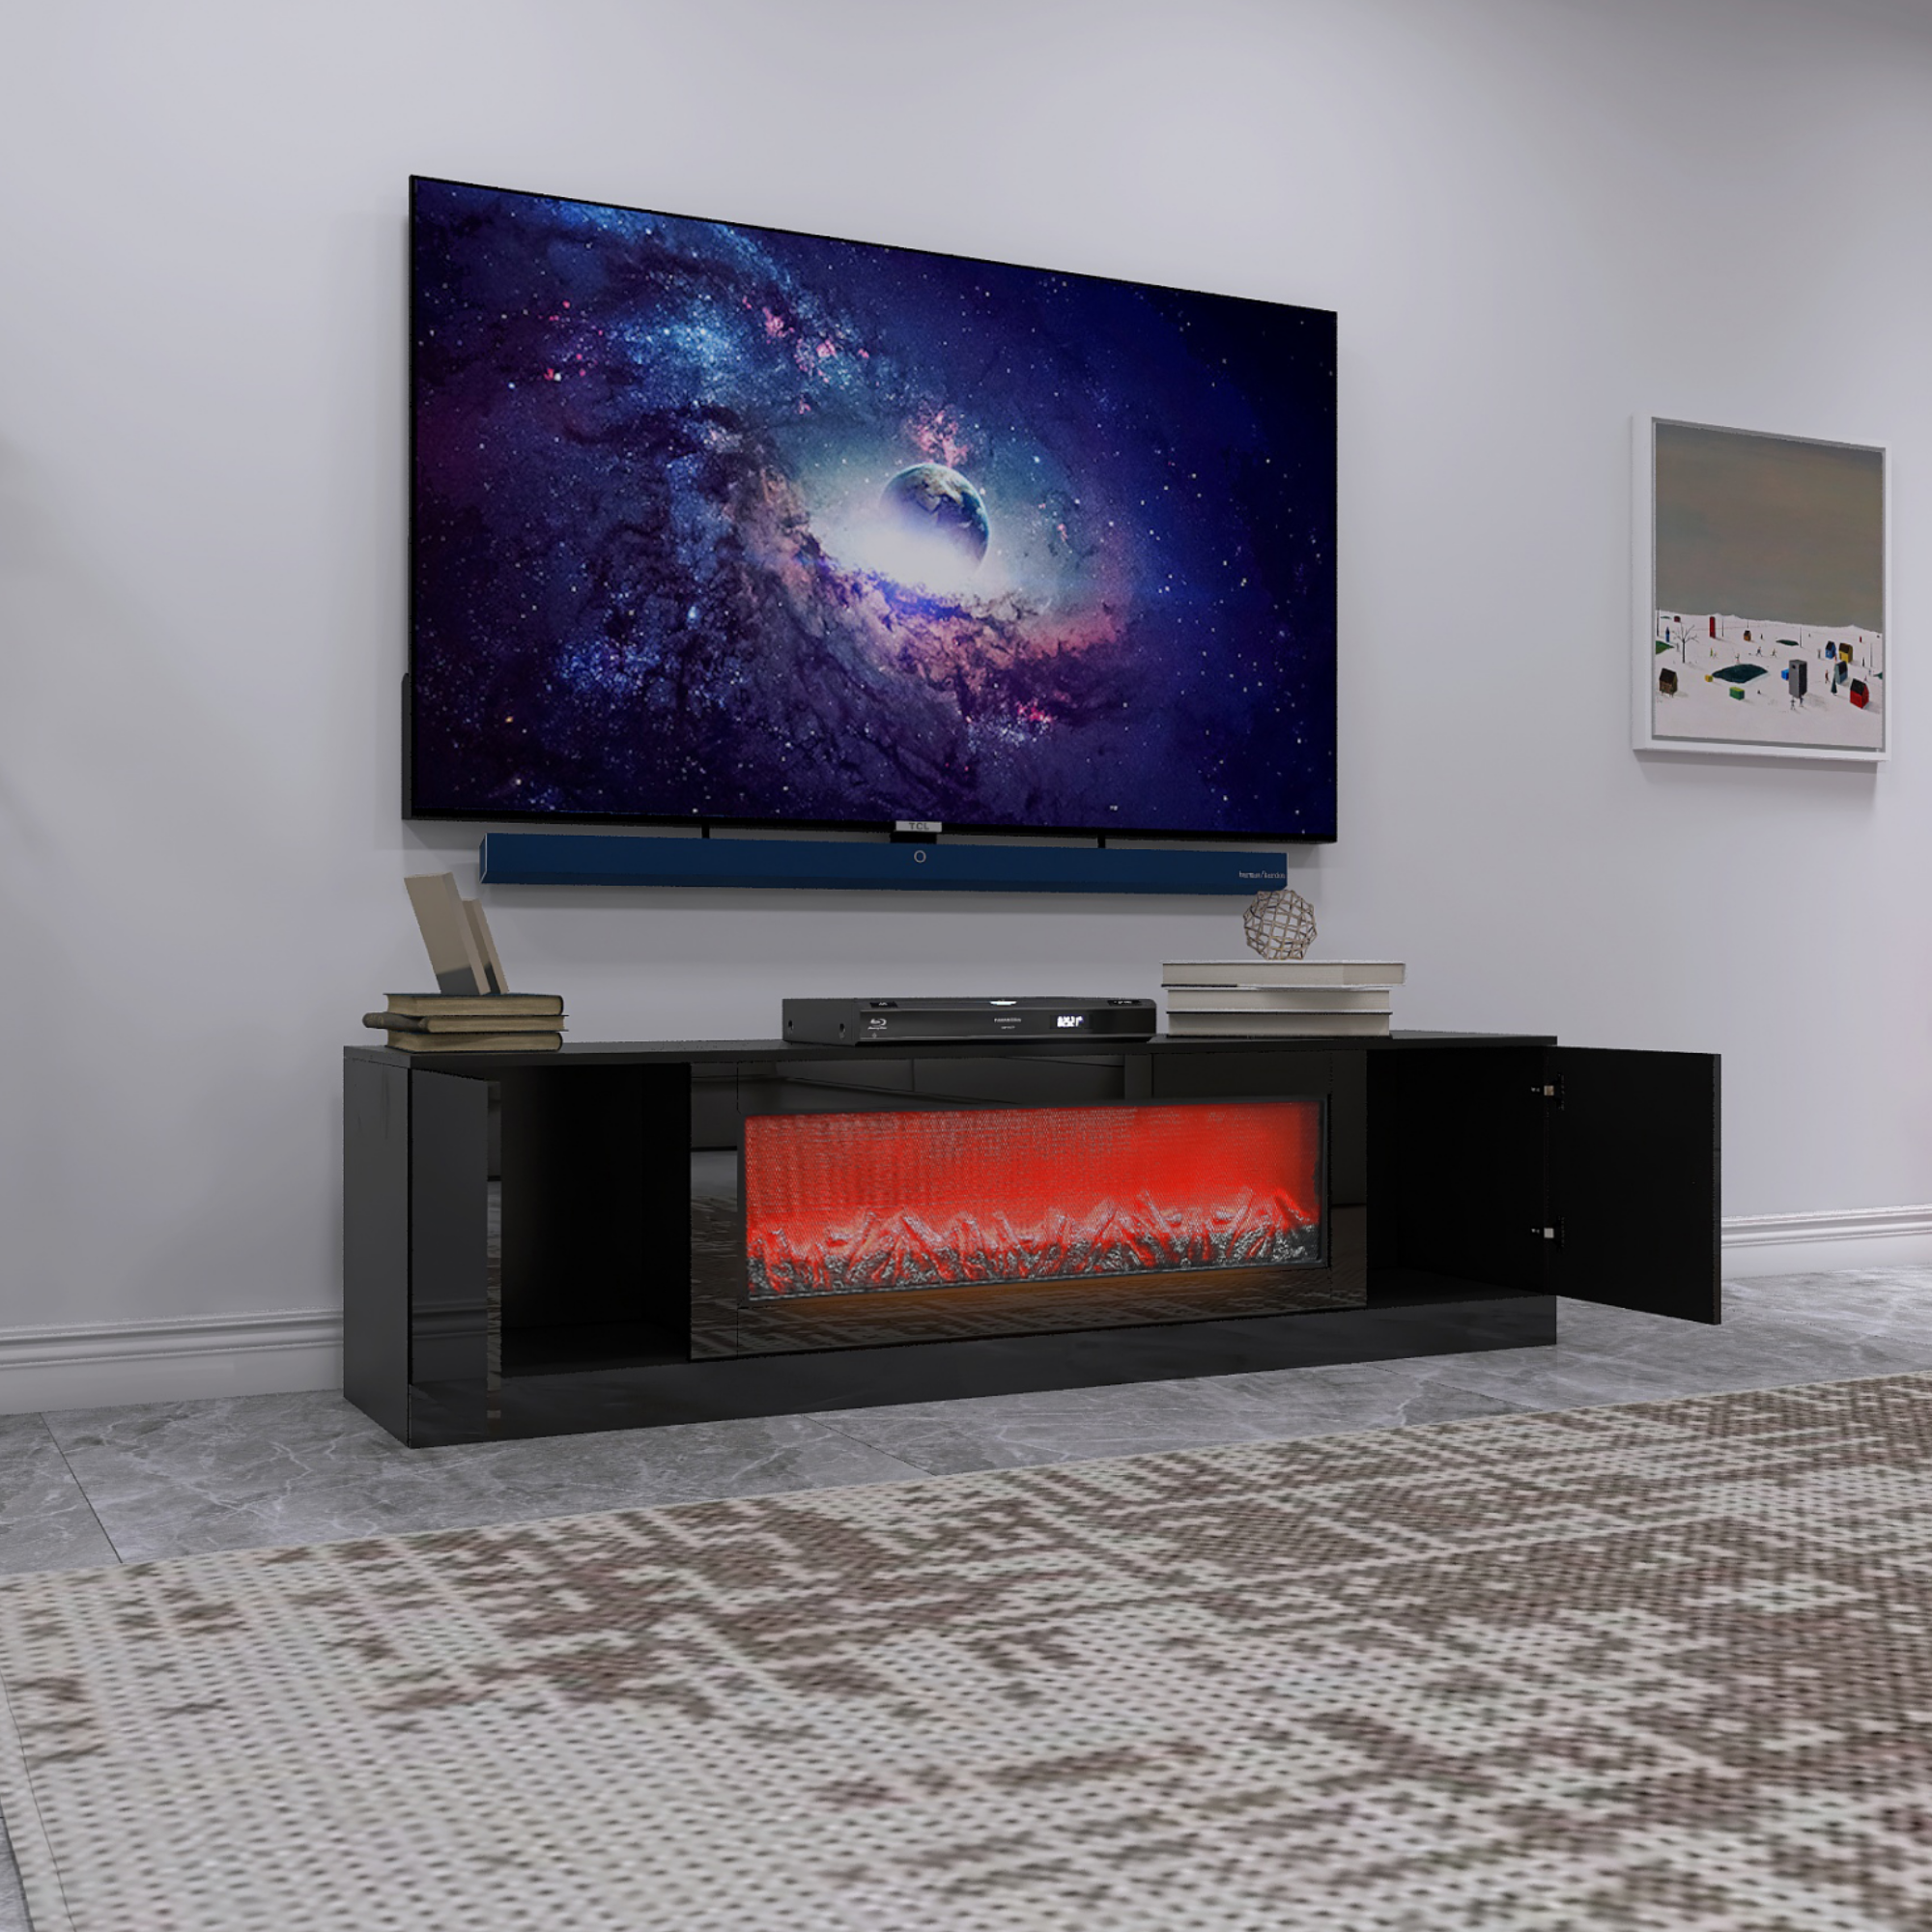 70.87" Black High Glossy Modern TV Stand With Insert Electric Fireplace, Fits TV Up to 75"